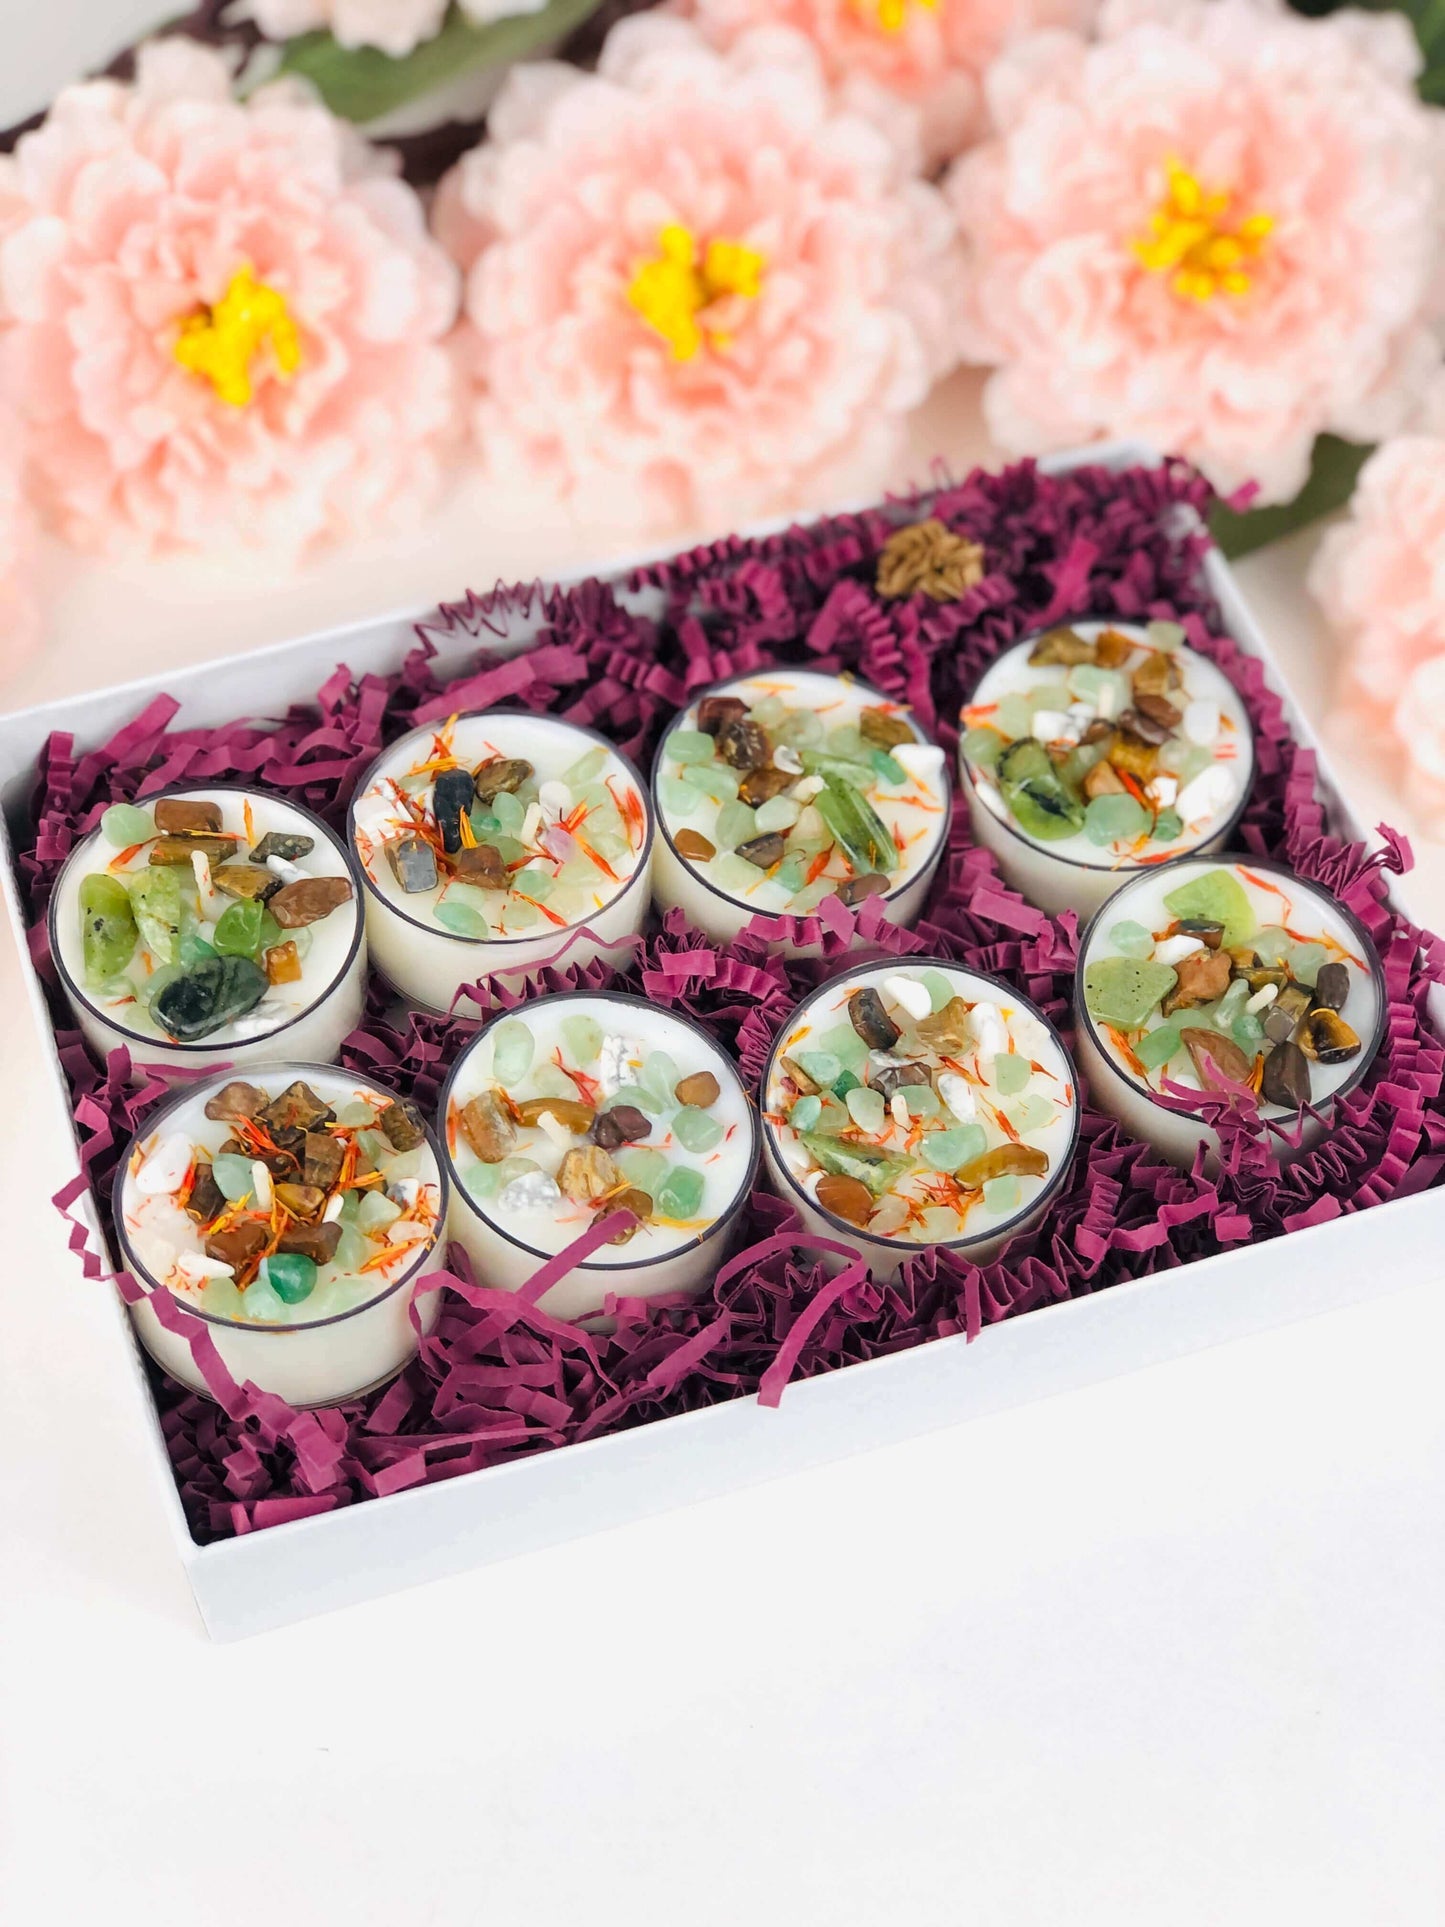 Mental clarity & Focus scented tealights box